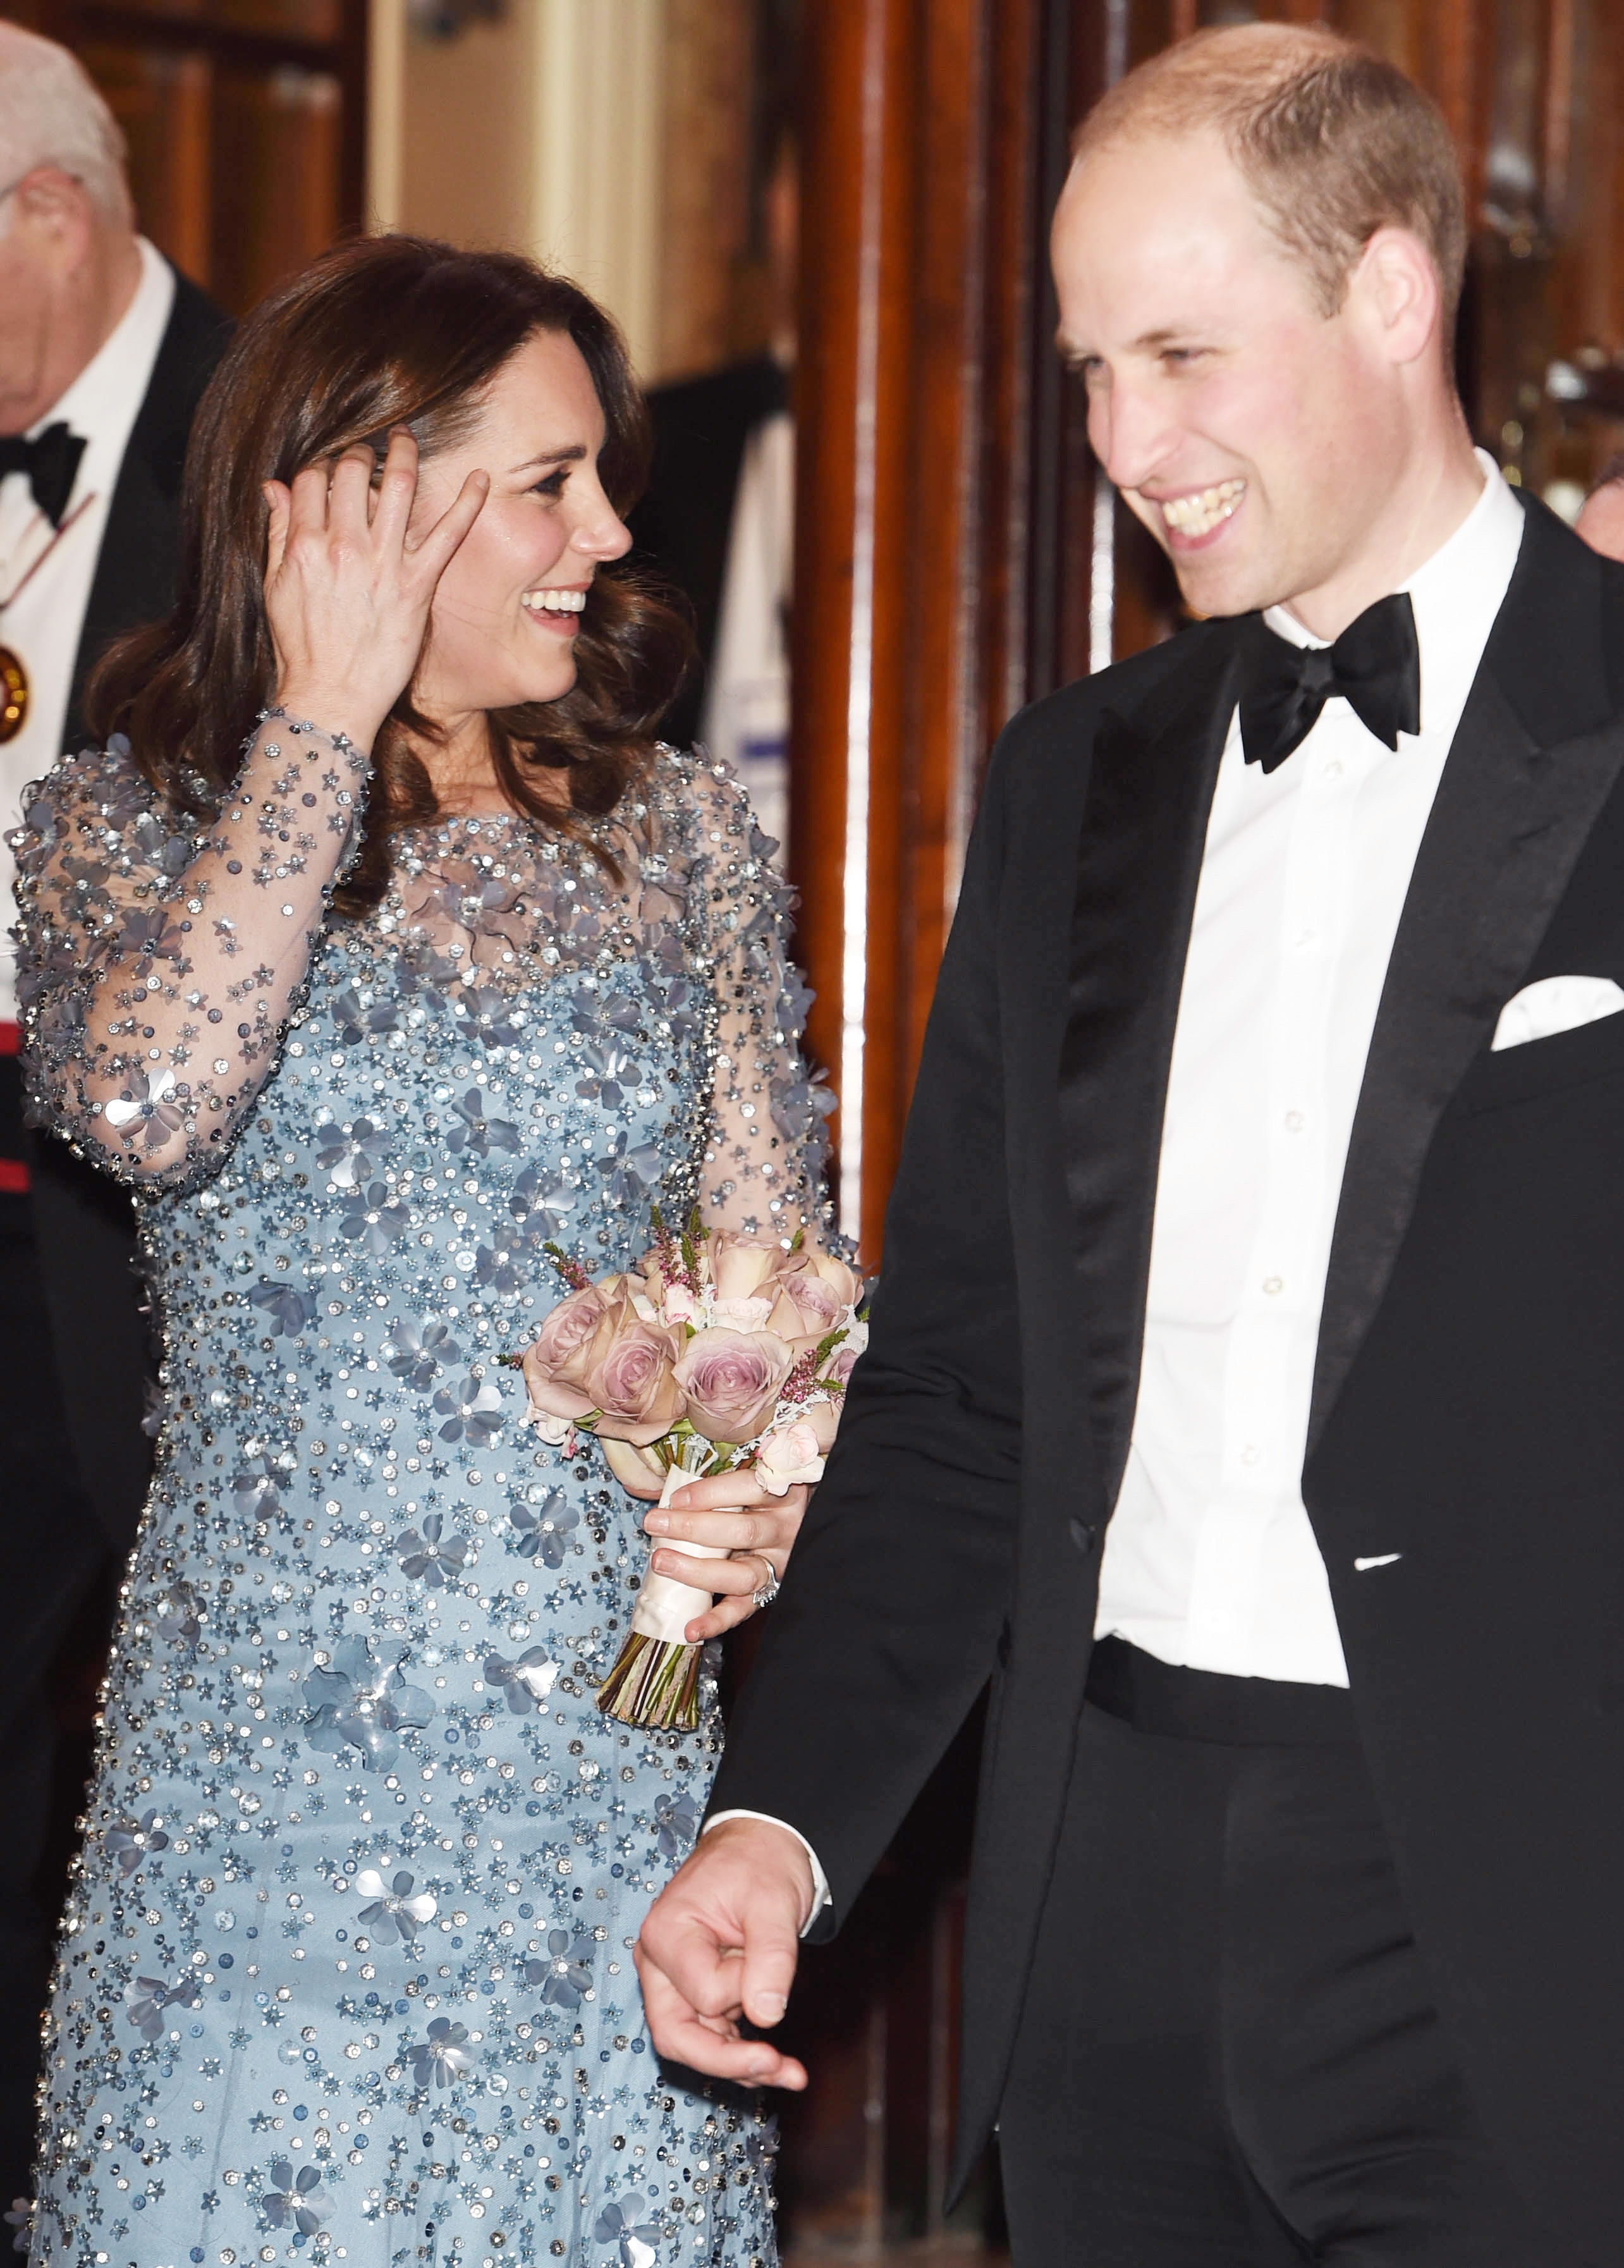 Kate Middleton And Prince William From The Big Picture Today S Hot Photos E News